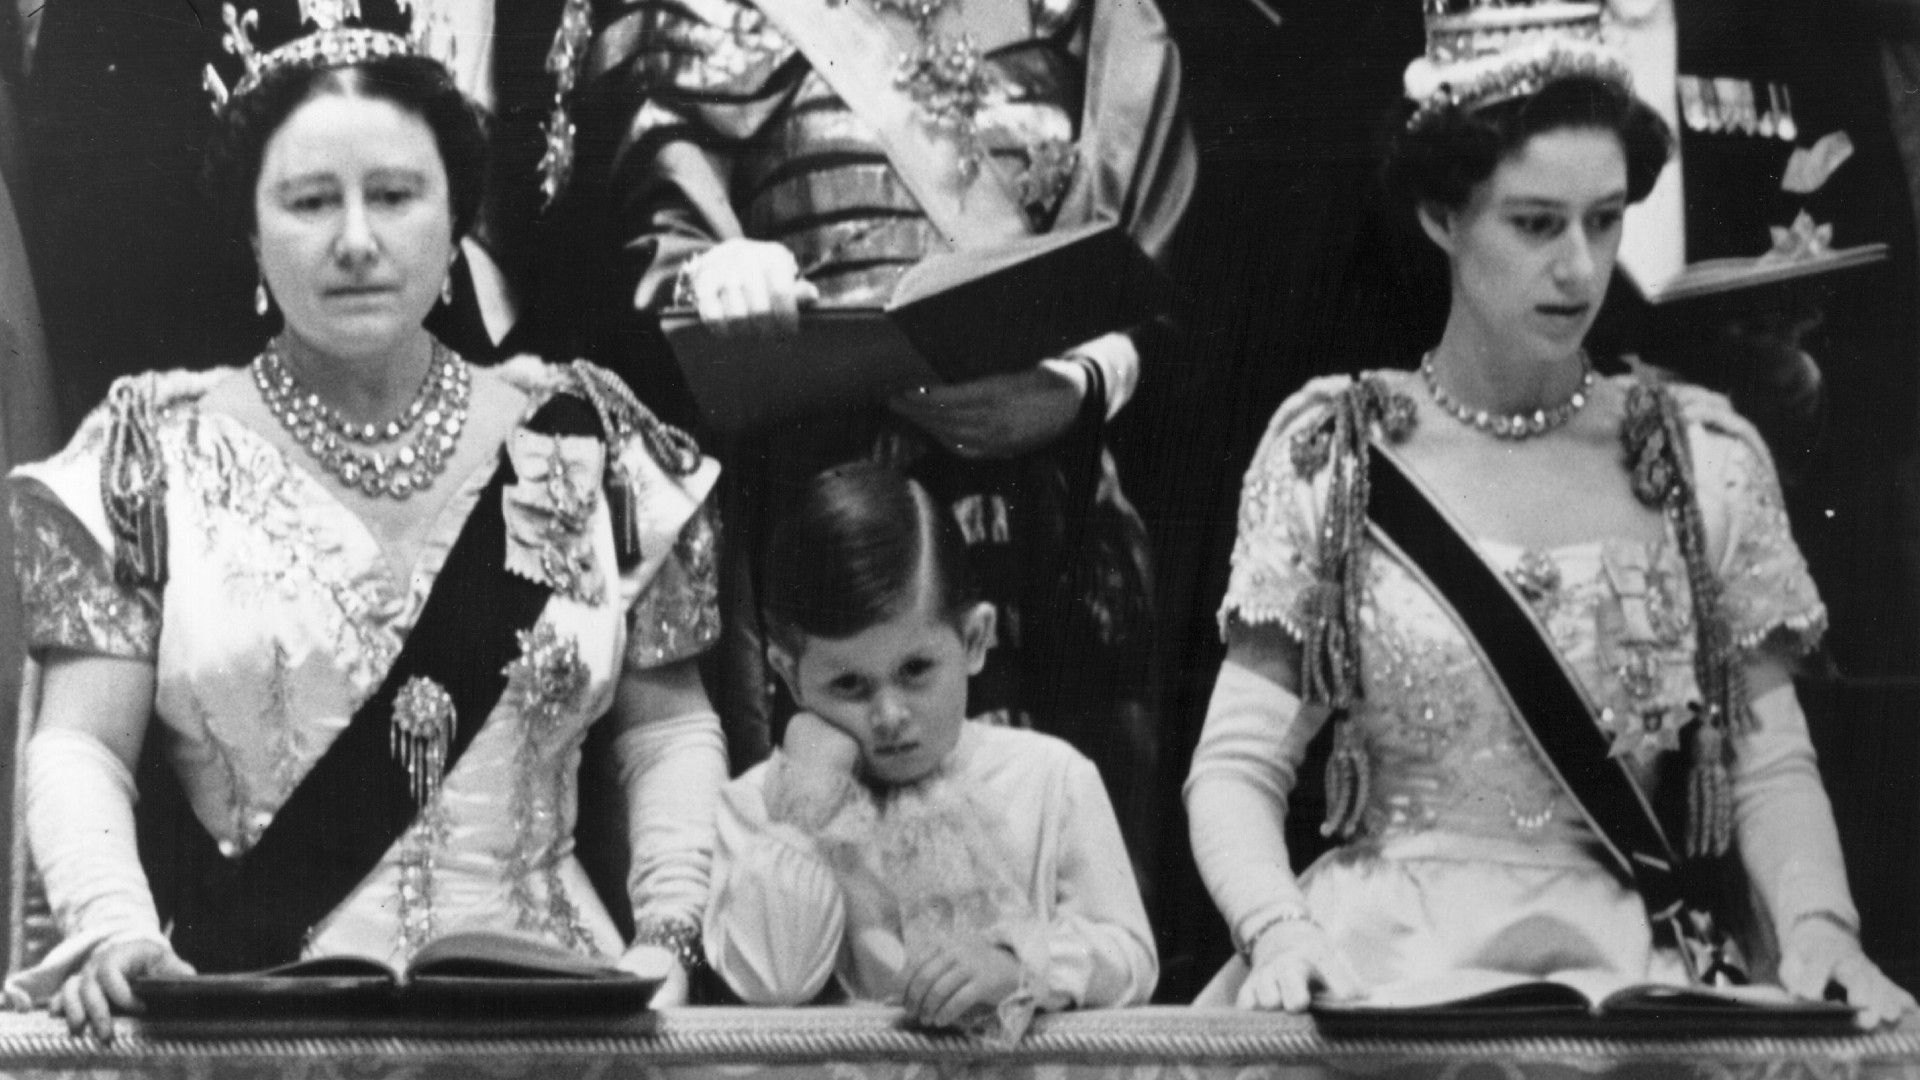 <p>                     Heart-warming and a delightful reminder that, royal or not, a child will still be a child, a young Prince Charles was caught looking hilariously unimpressed at the coronation of his mother, Queen Elizabeth II in 1953.                   </p>                                      <p>                     He was stood with his mother, Queen Elizabeth - best known as The Queen Mother - and his aunt, Princess Margaret.                   </p>                                      <p>                     Aged four years old at the time, formality still reigned supreme for the royals. Despite being his mother, the then Prince Charles received a special hand-painted children's invitation to the Coronation.                   </p>